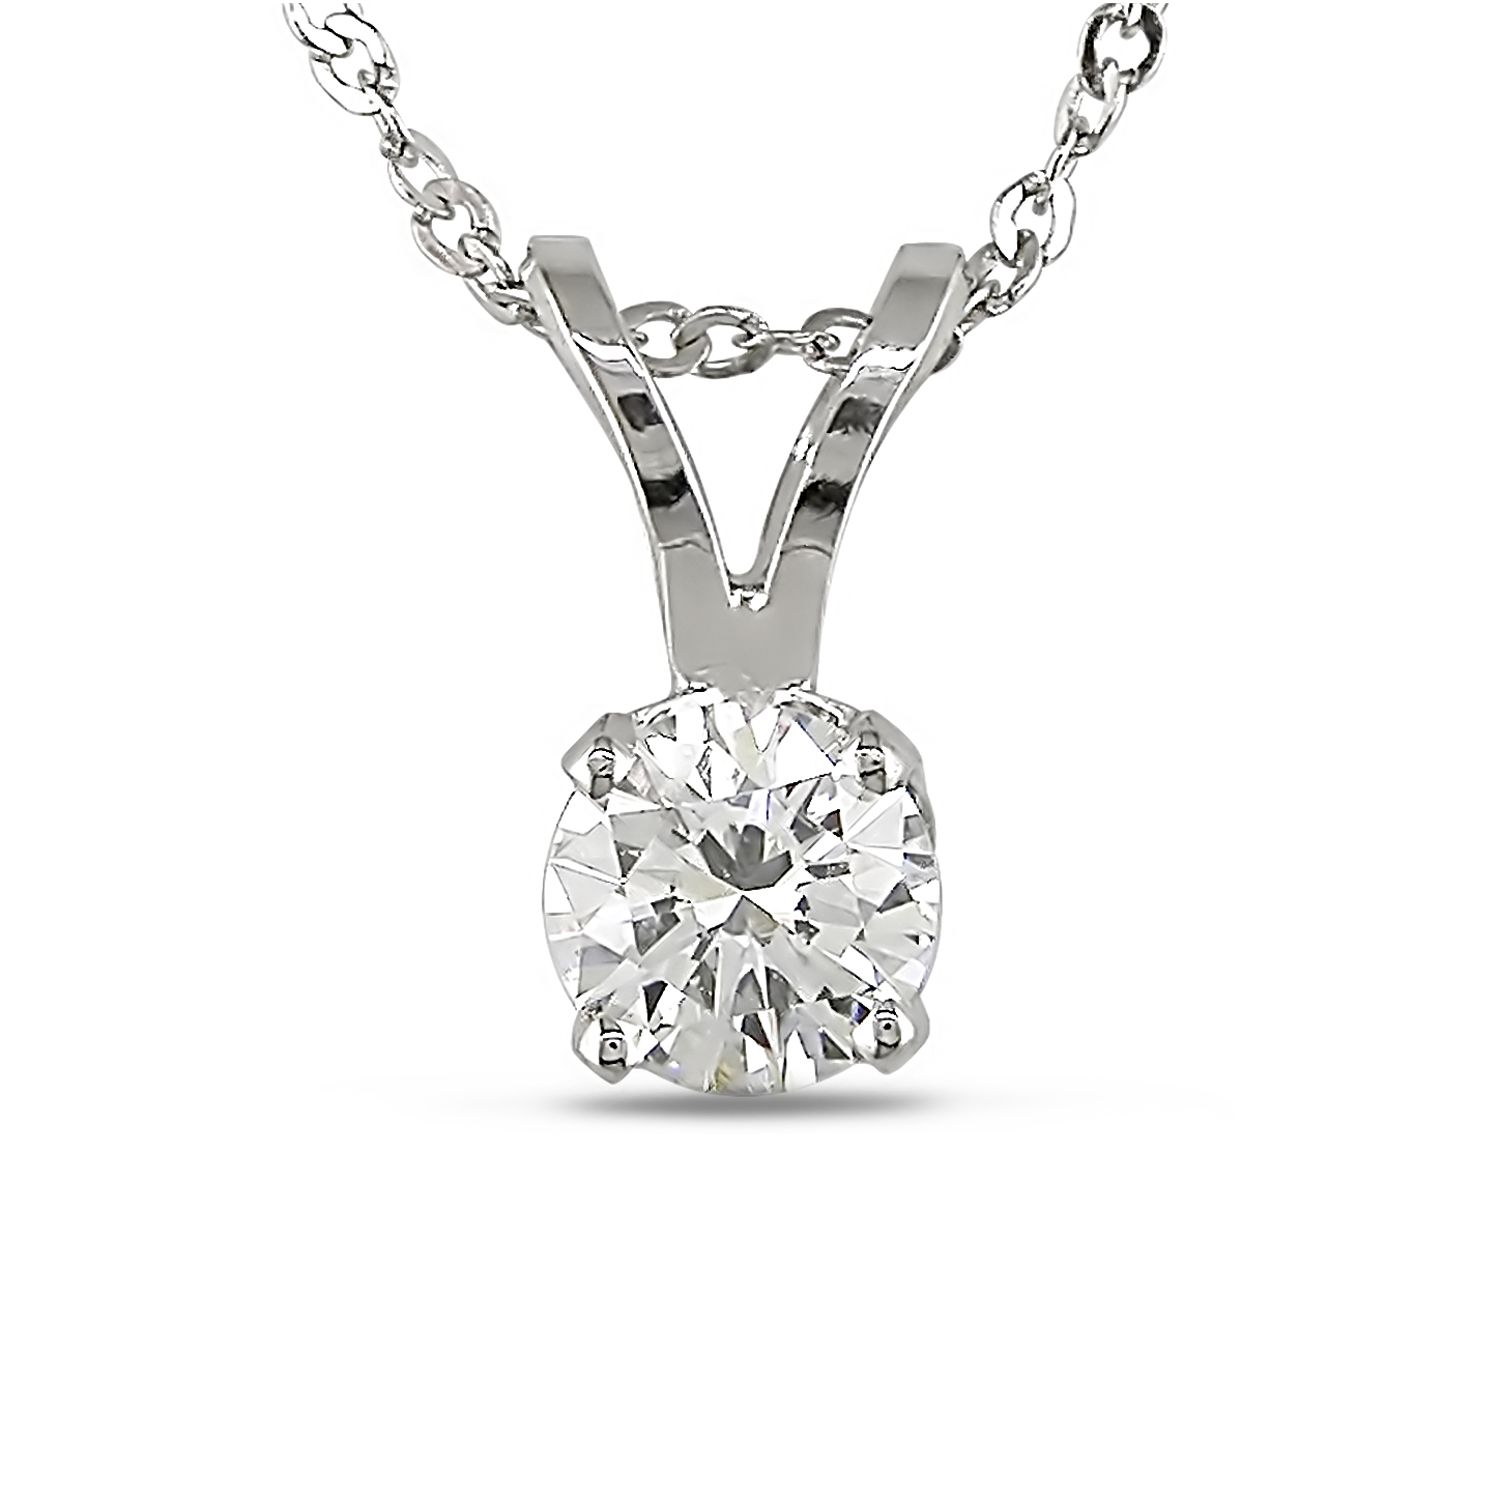 1/4 CTTW Diamond Solitaire Pendant With Chain in 14k White Gold GH I2-I3